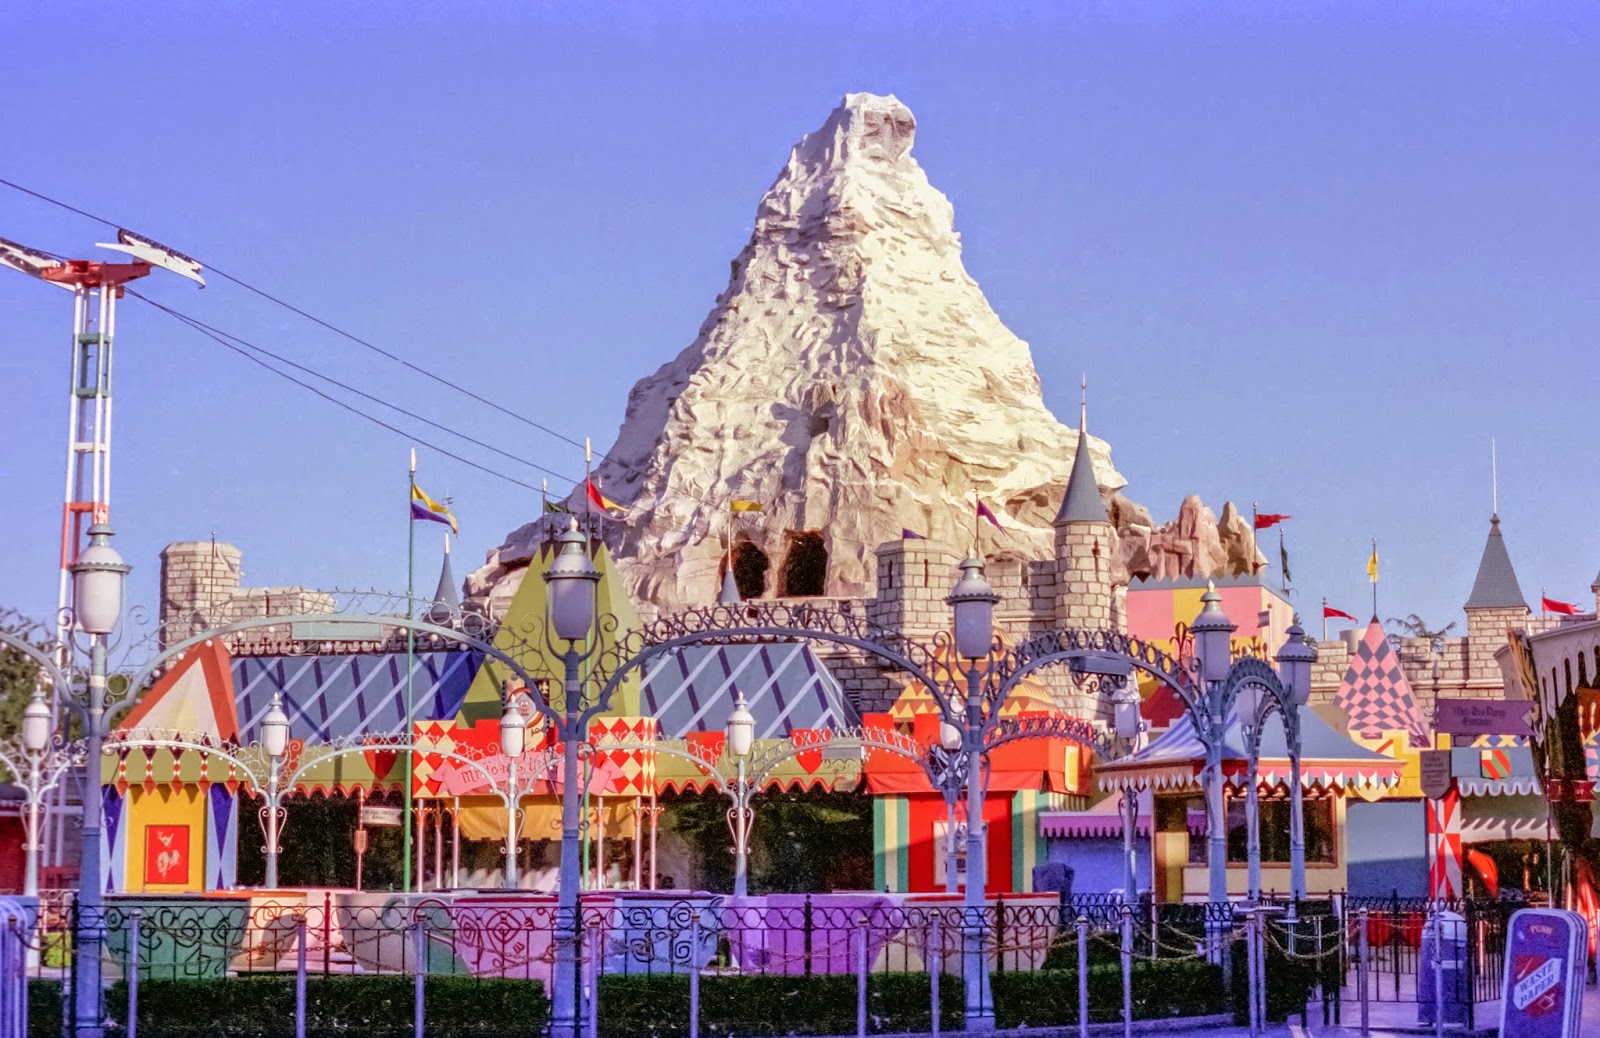  Fantasyland with the Matterhorn in the background from the 60s